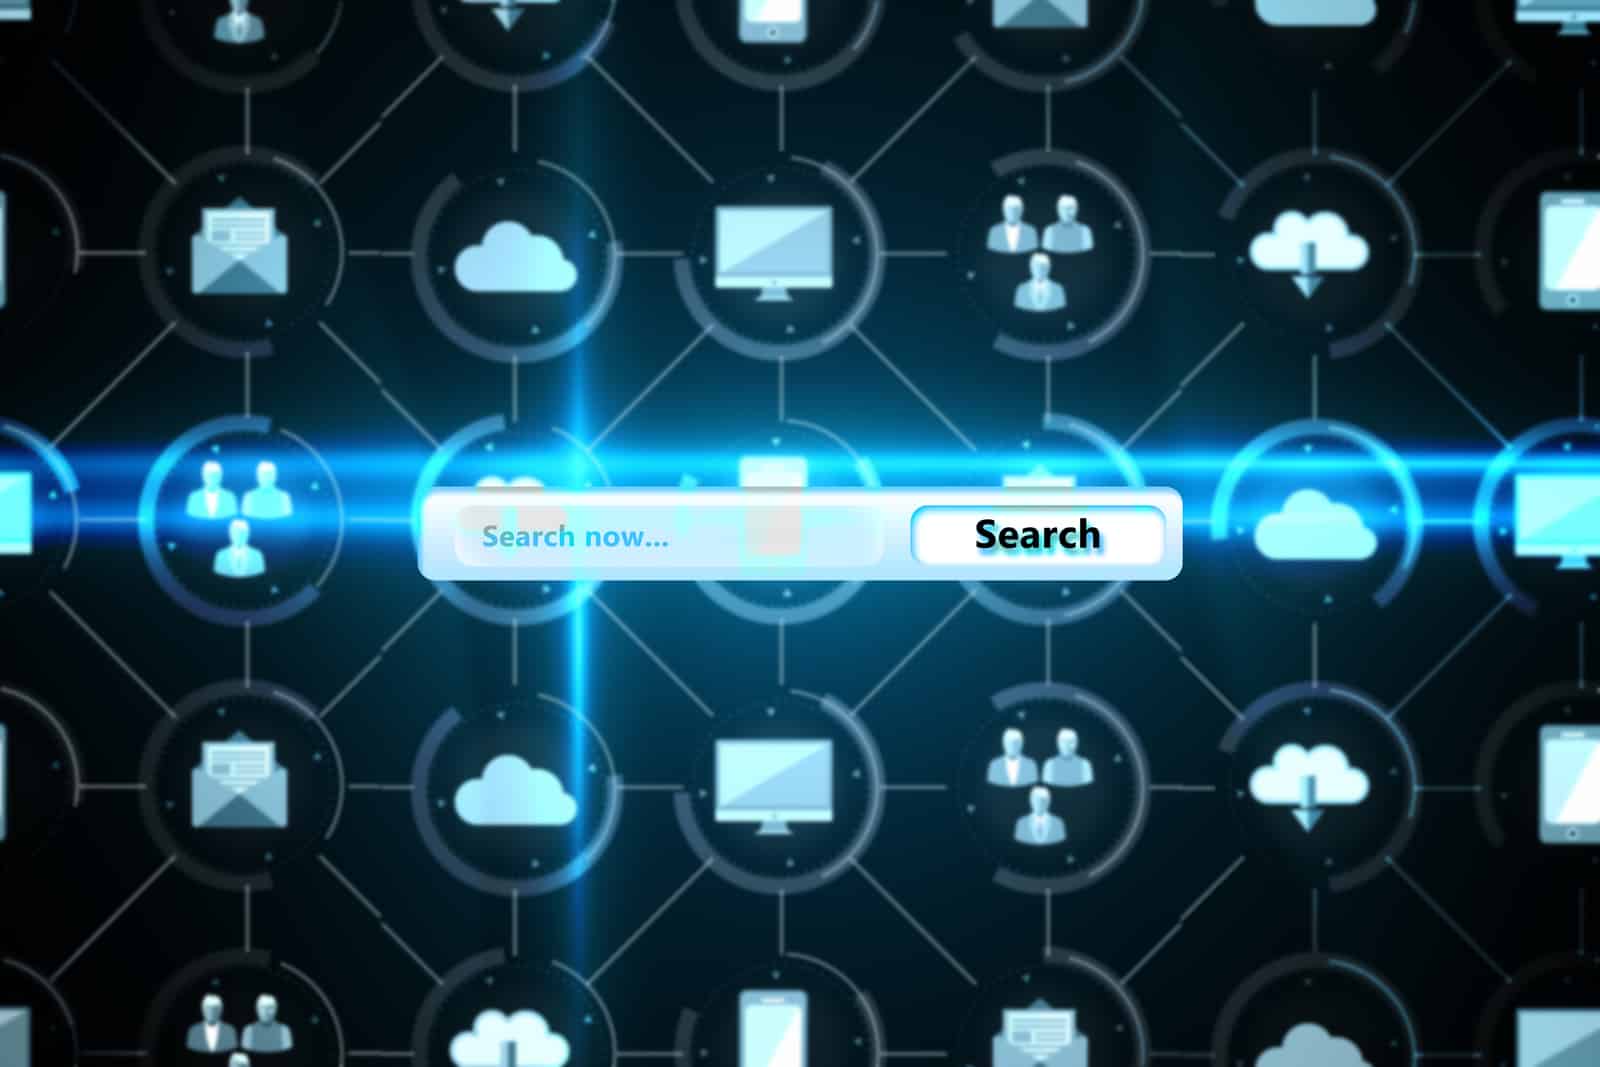 Bard has access to the information on Google's massive search engine